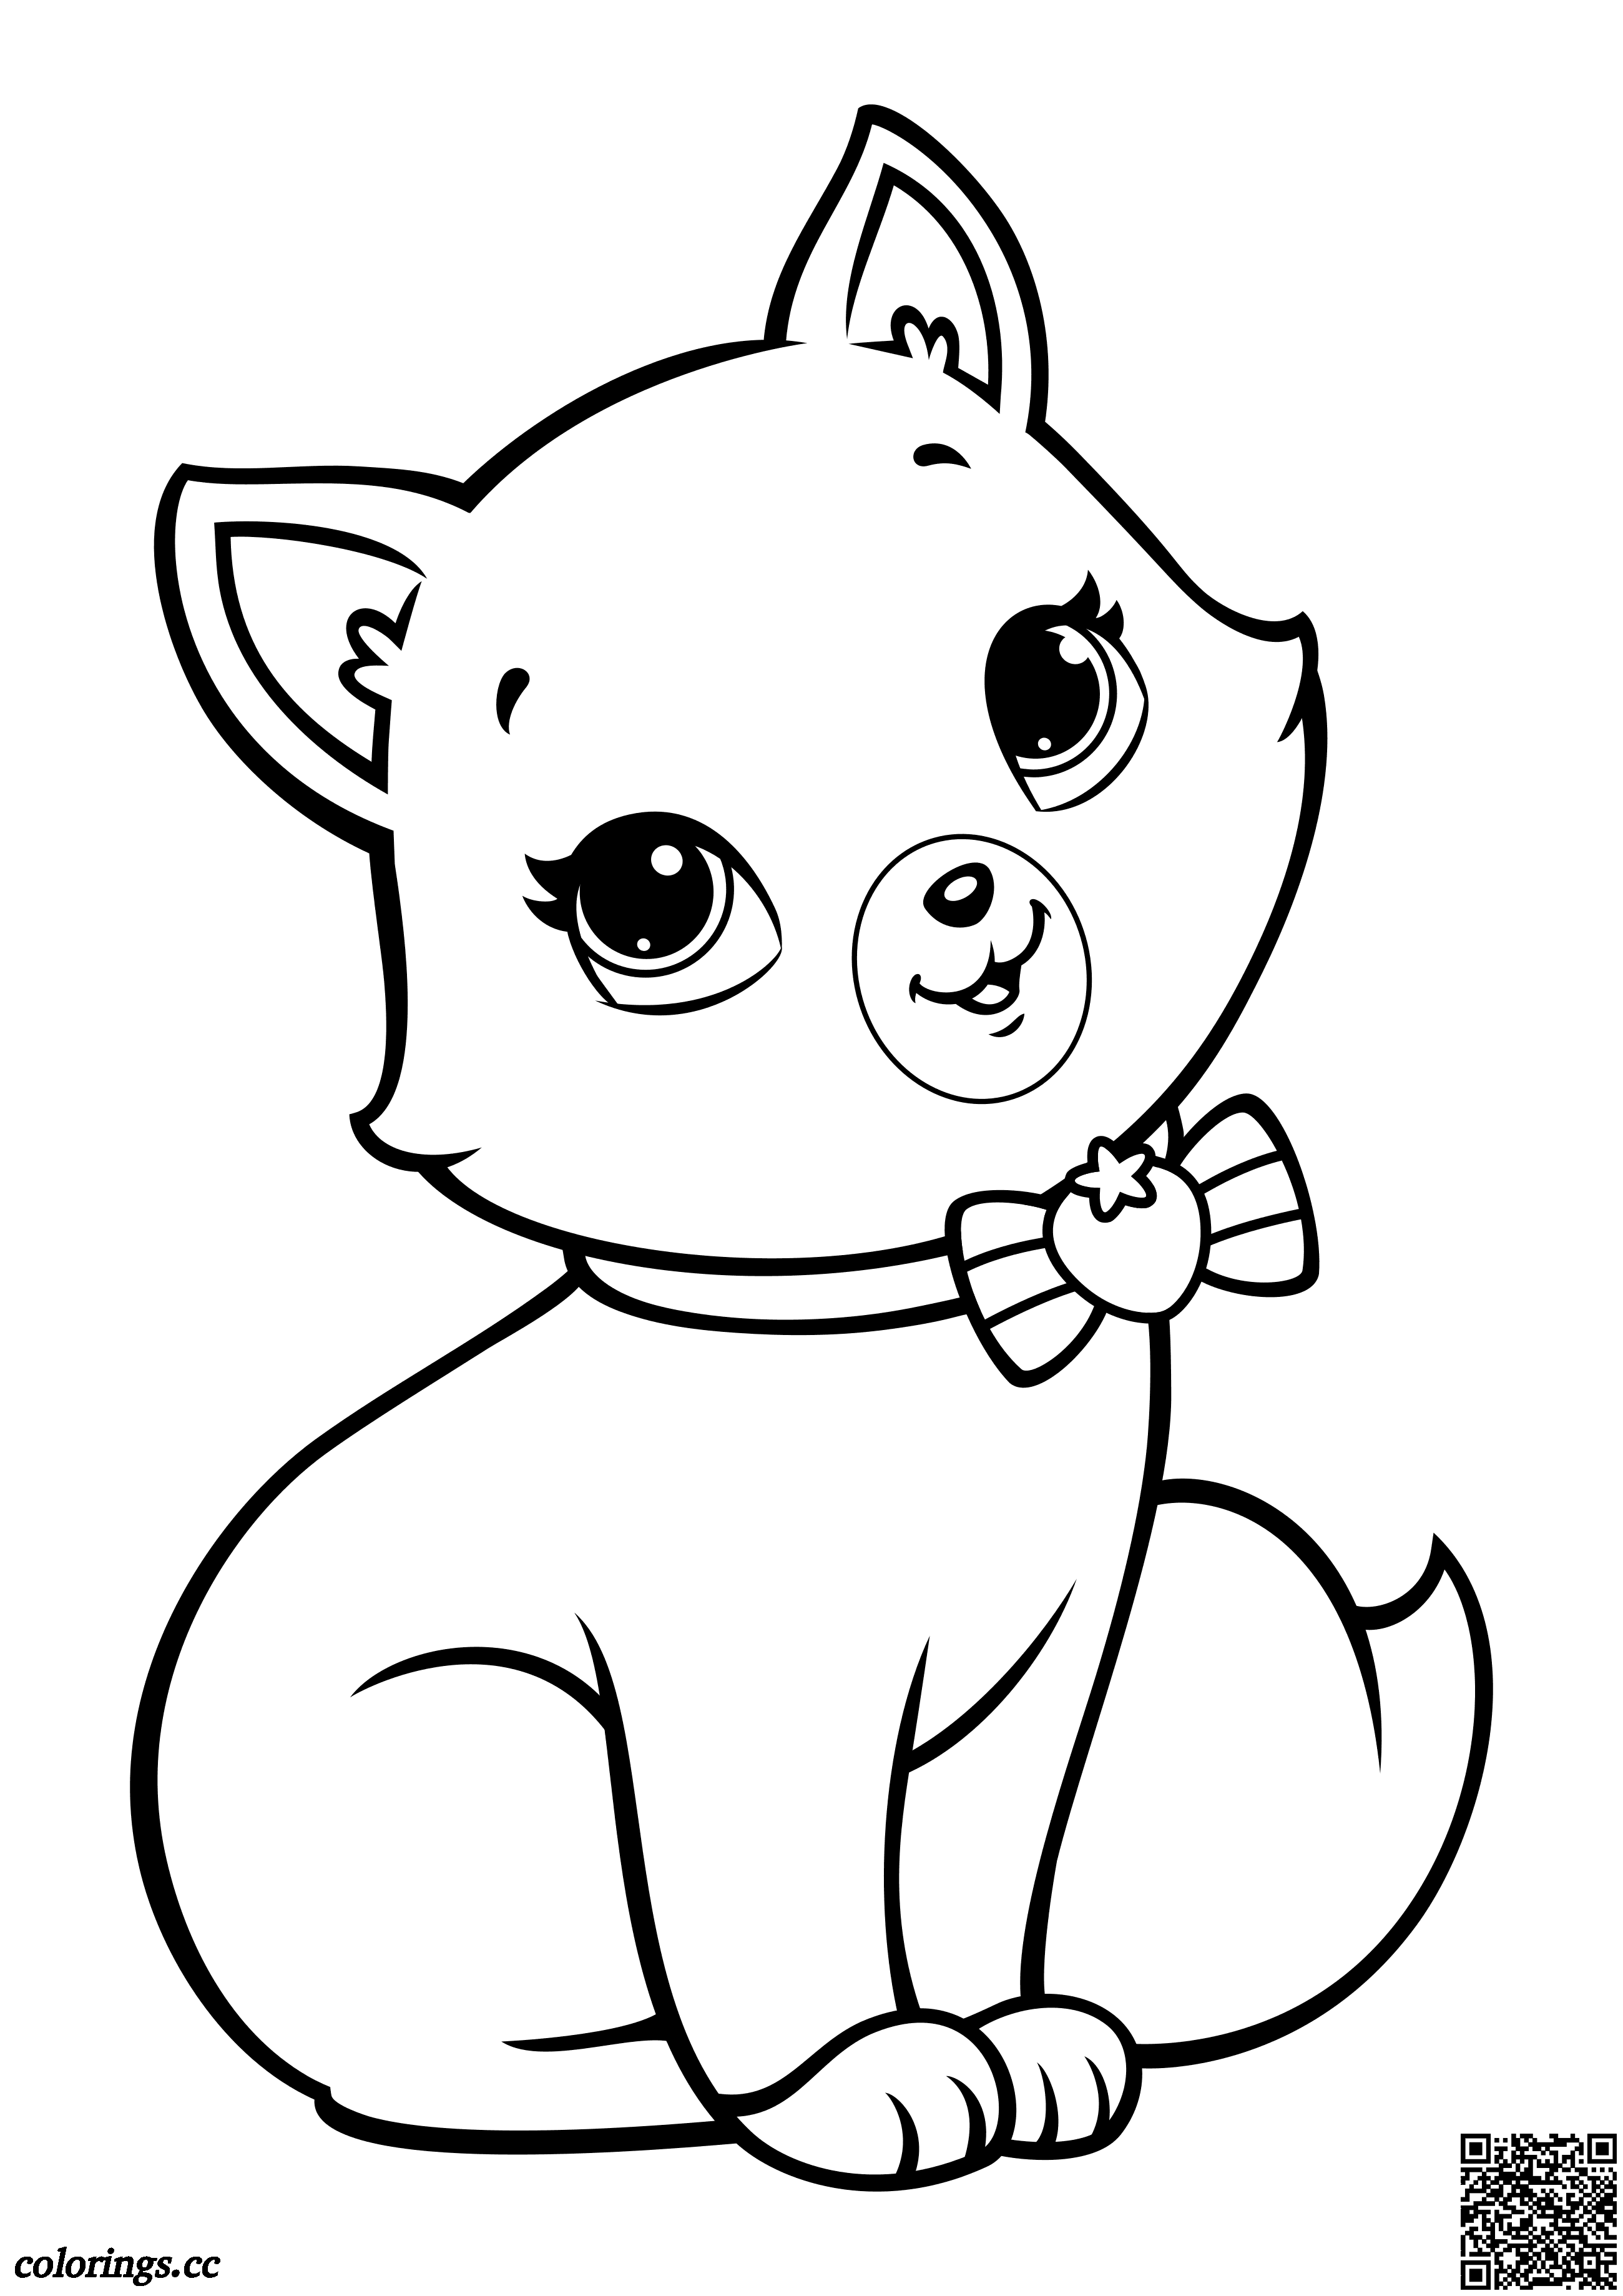 Kitten Custard coloring pages, Charlotte Strawberry Shortcake Berry